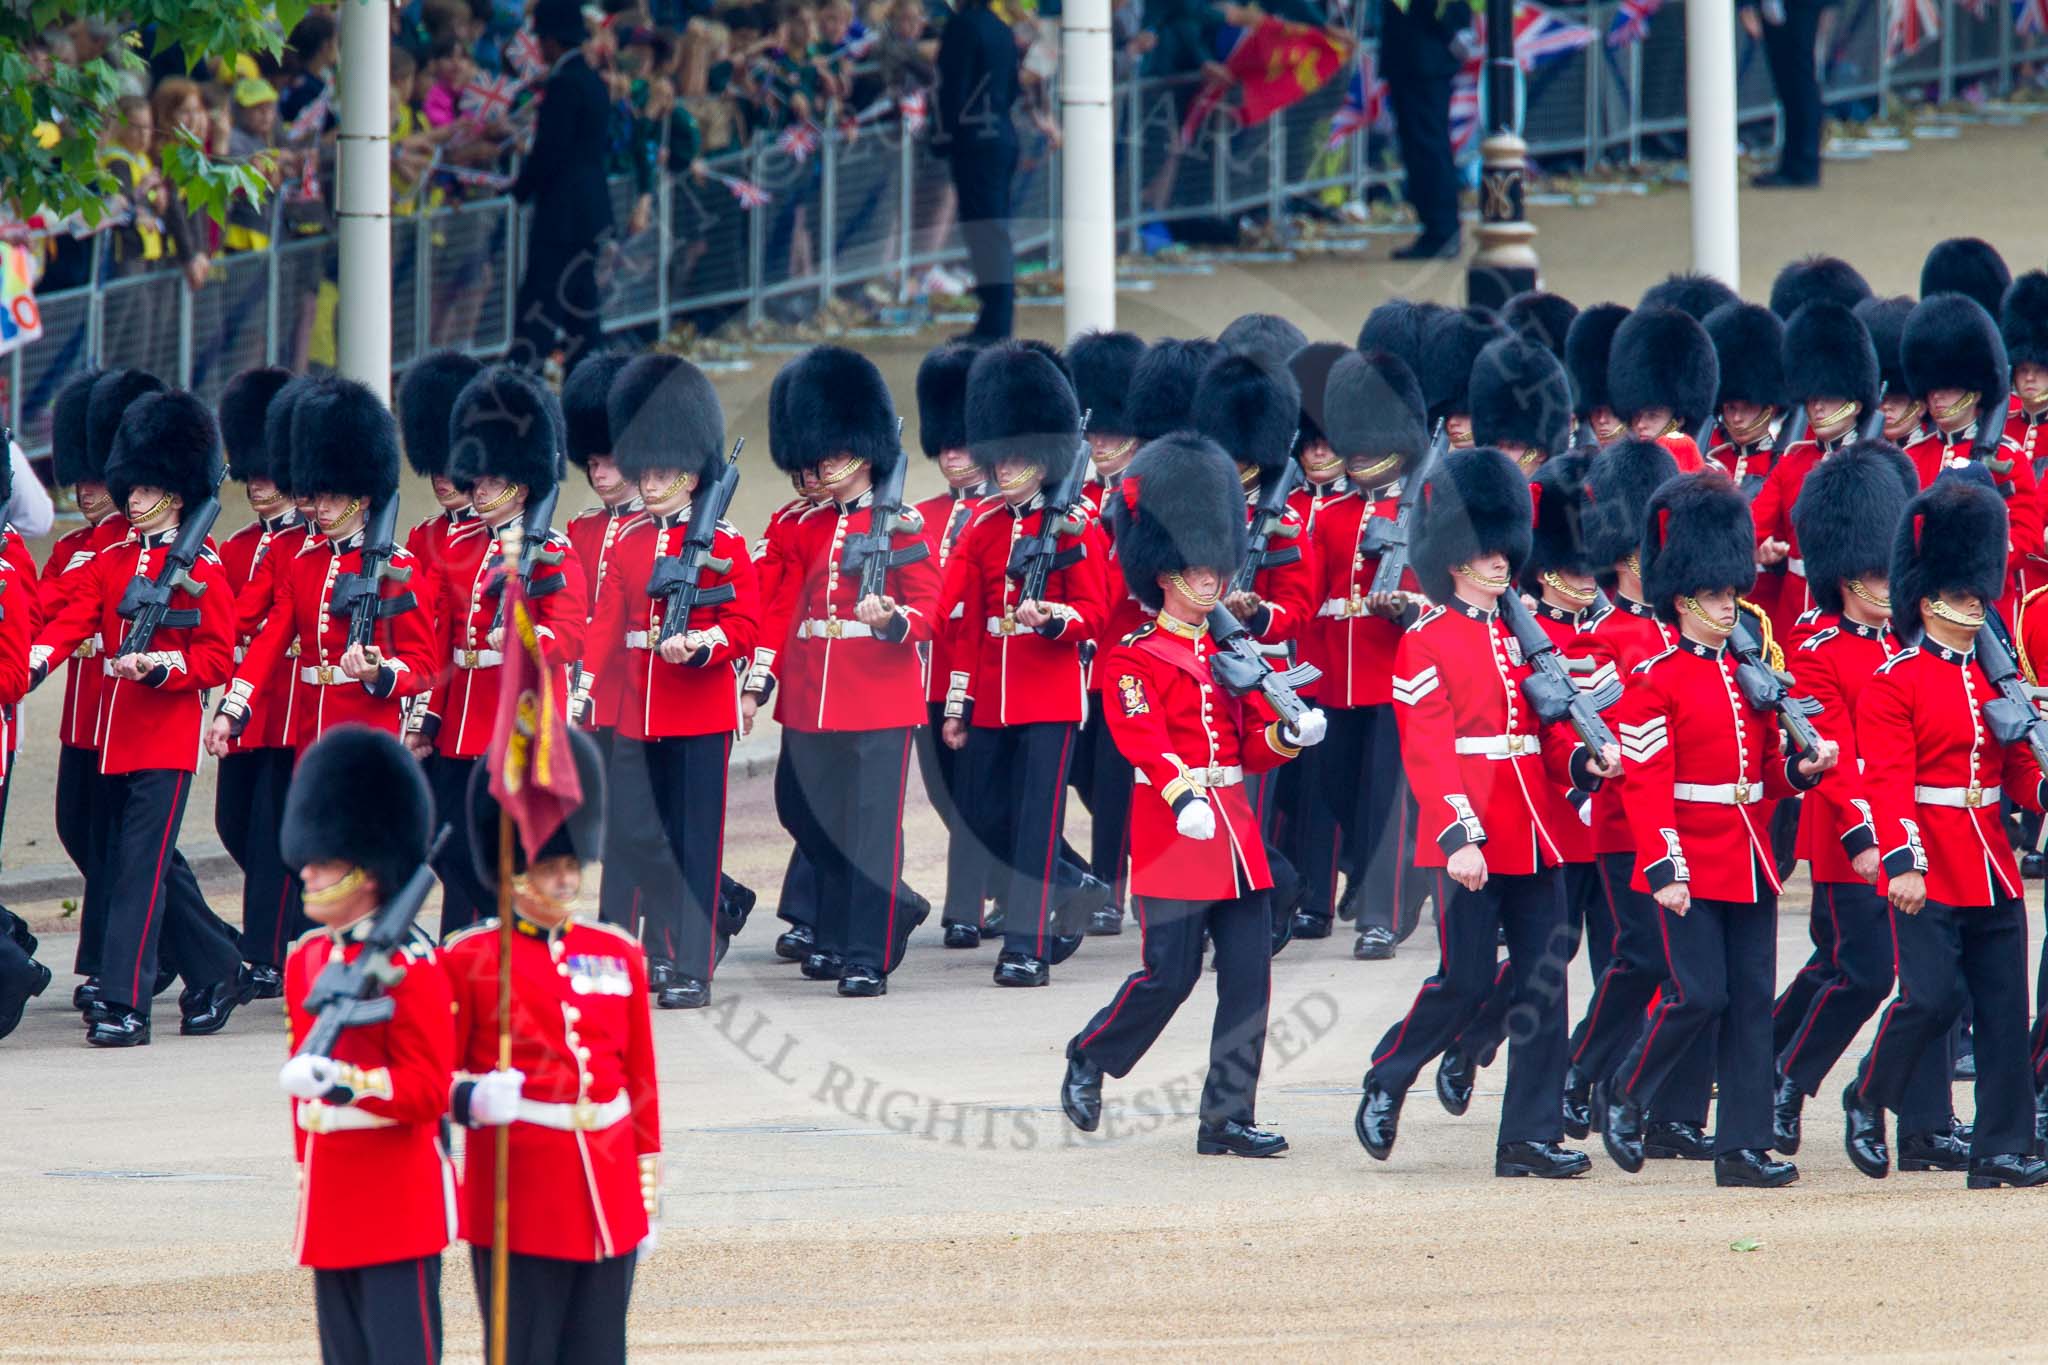 Trooping the Colour 2014.
Horse Guards Parade, Westminster,
London SW1A,

United Kingdom,
on 14 June 2014 at 10:24, image #123